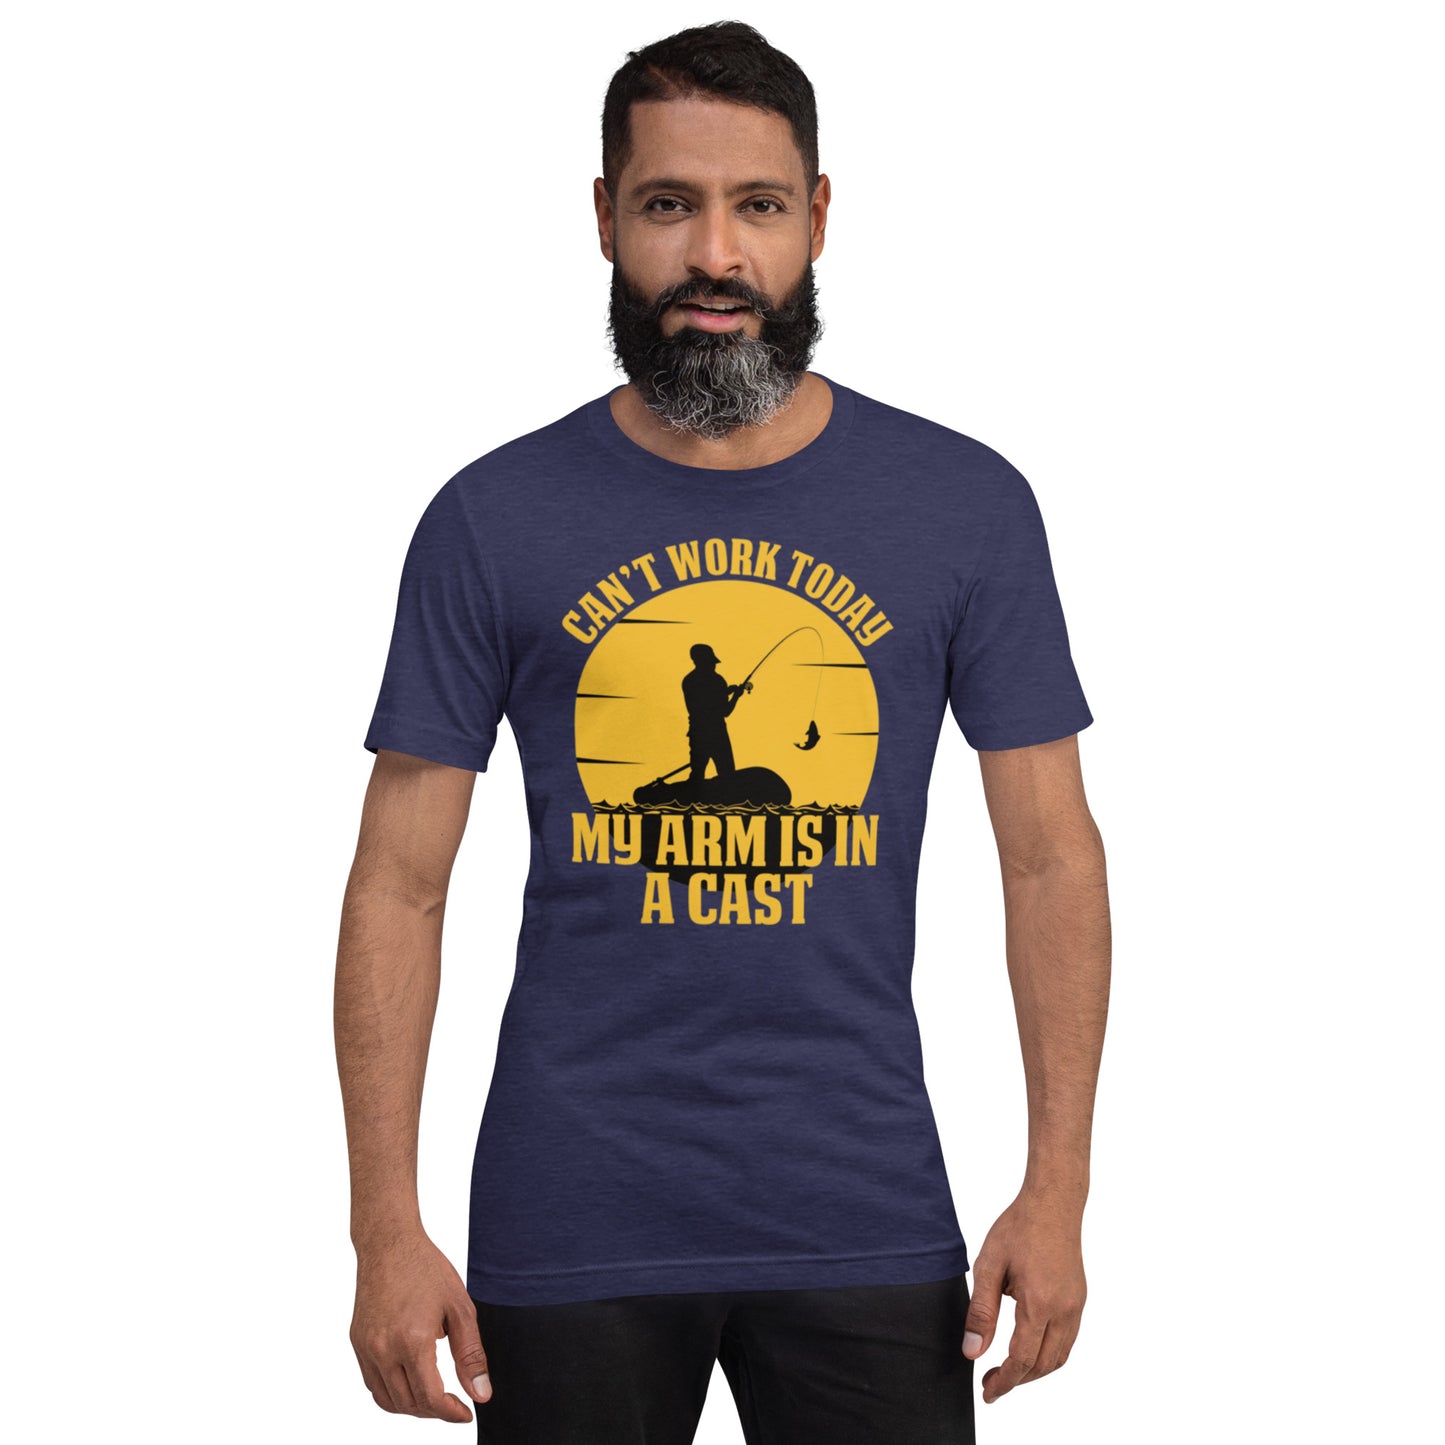 Can't Work Today Unisex t-shirt